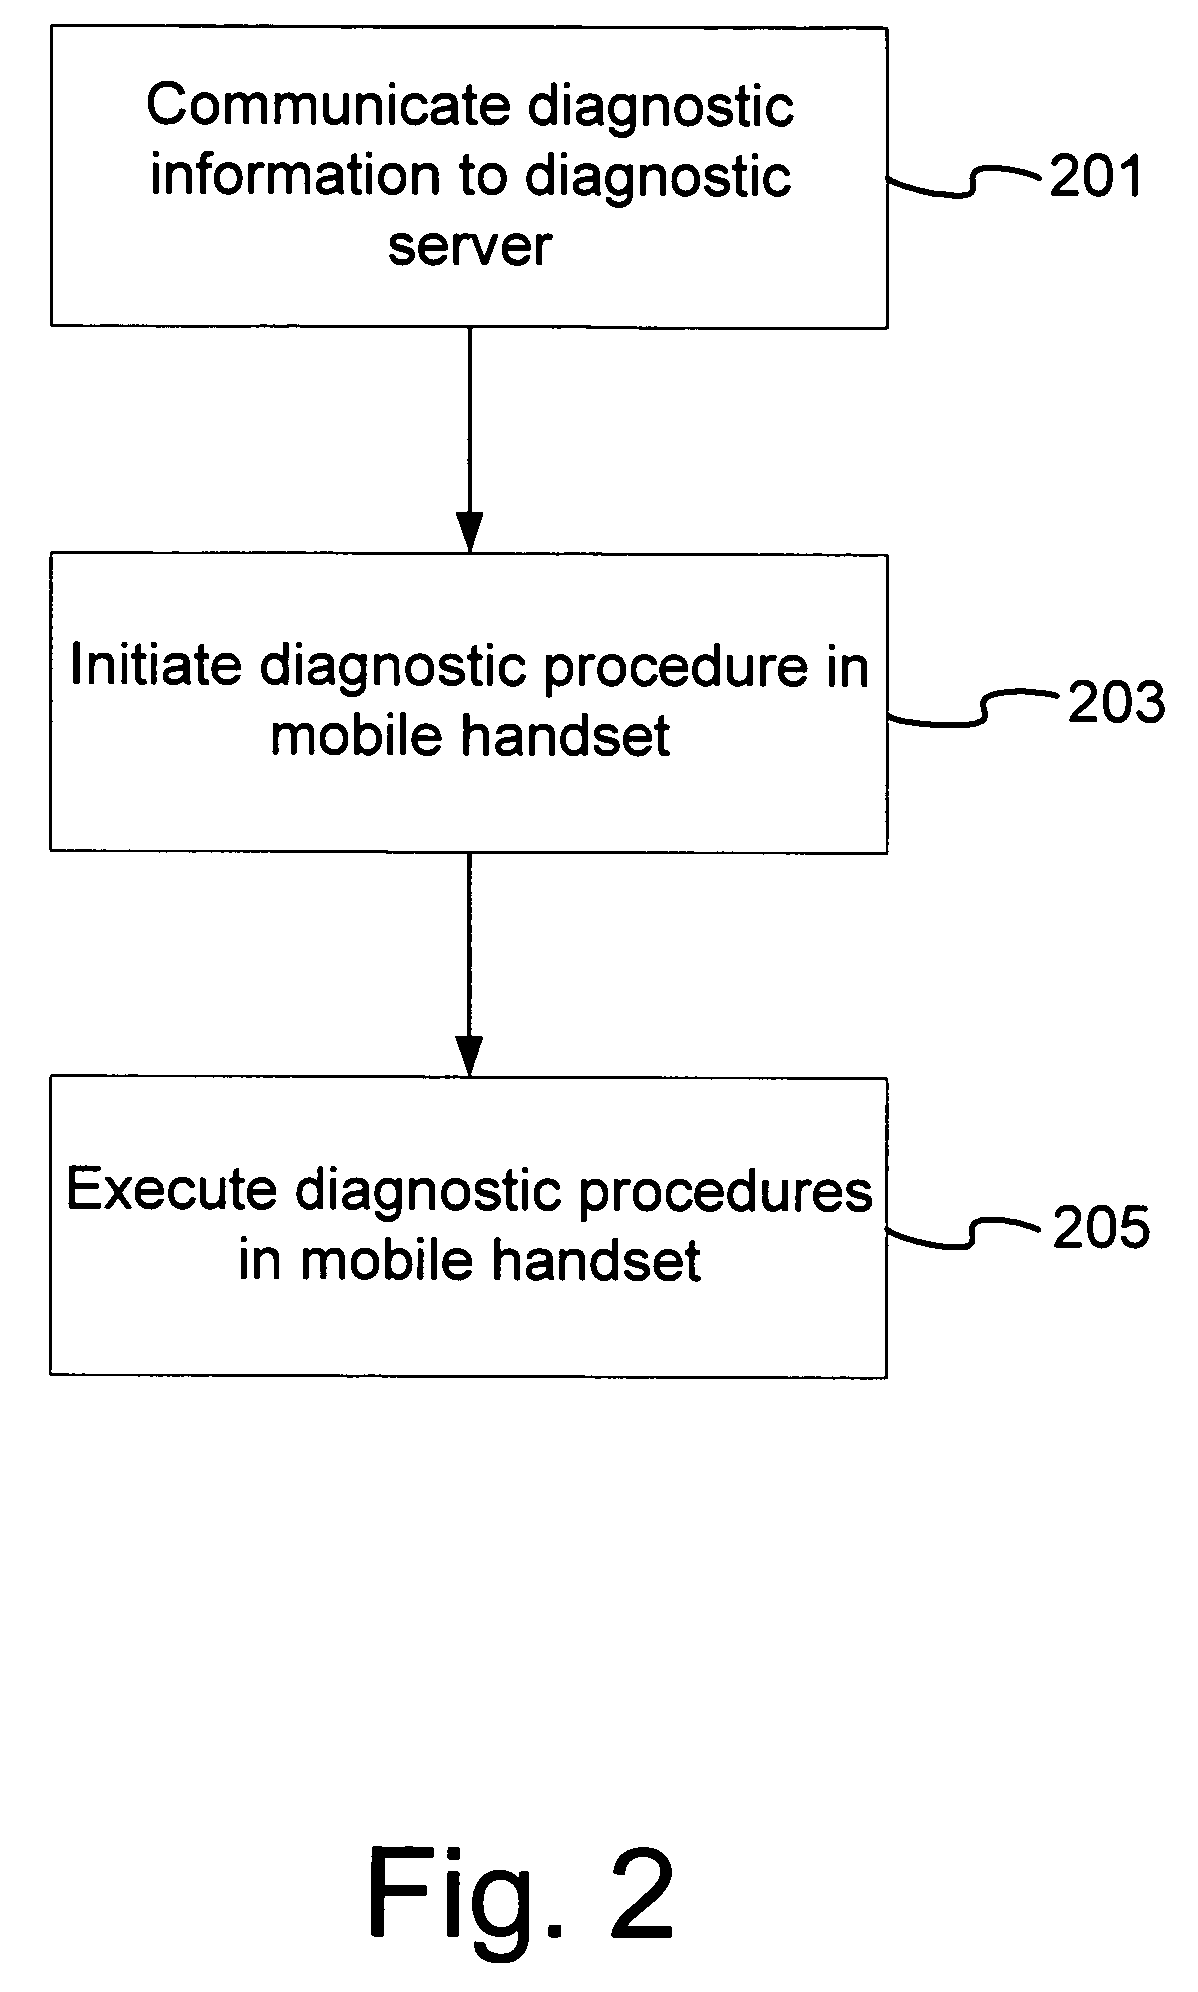 Carrier network capable of conducting remote diagnostics in a mobile handset